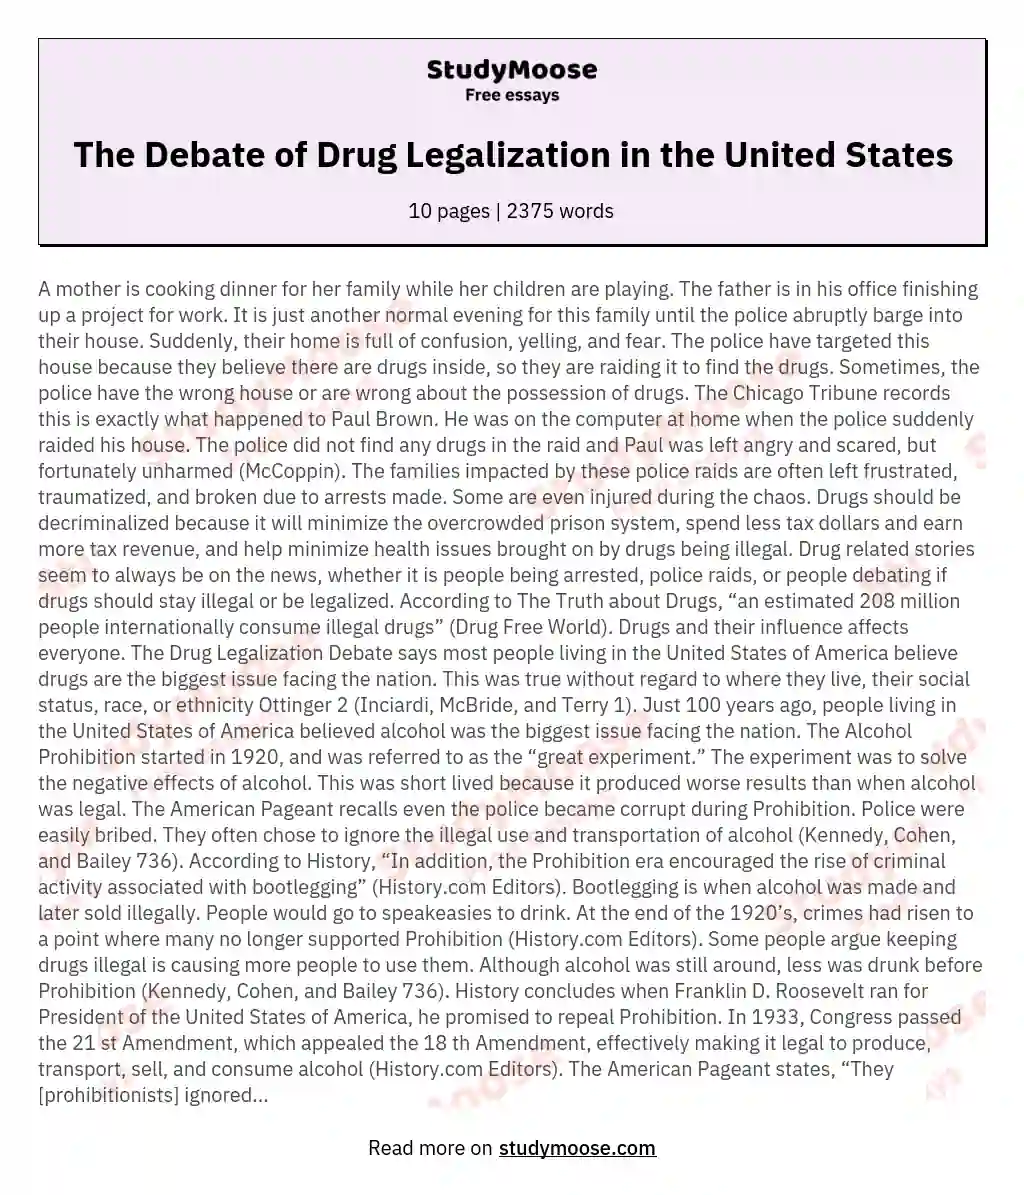 The Debate of Drug Legalization in the United States essay